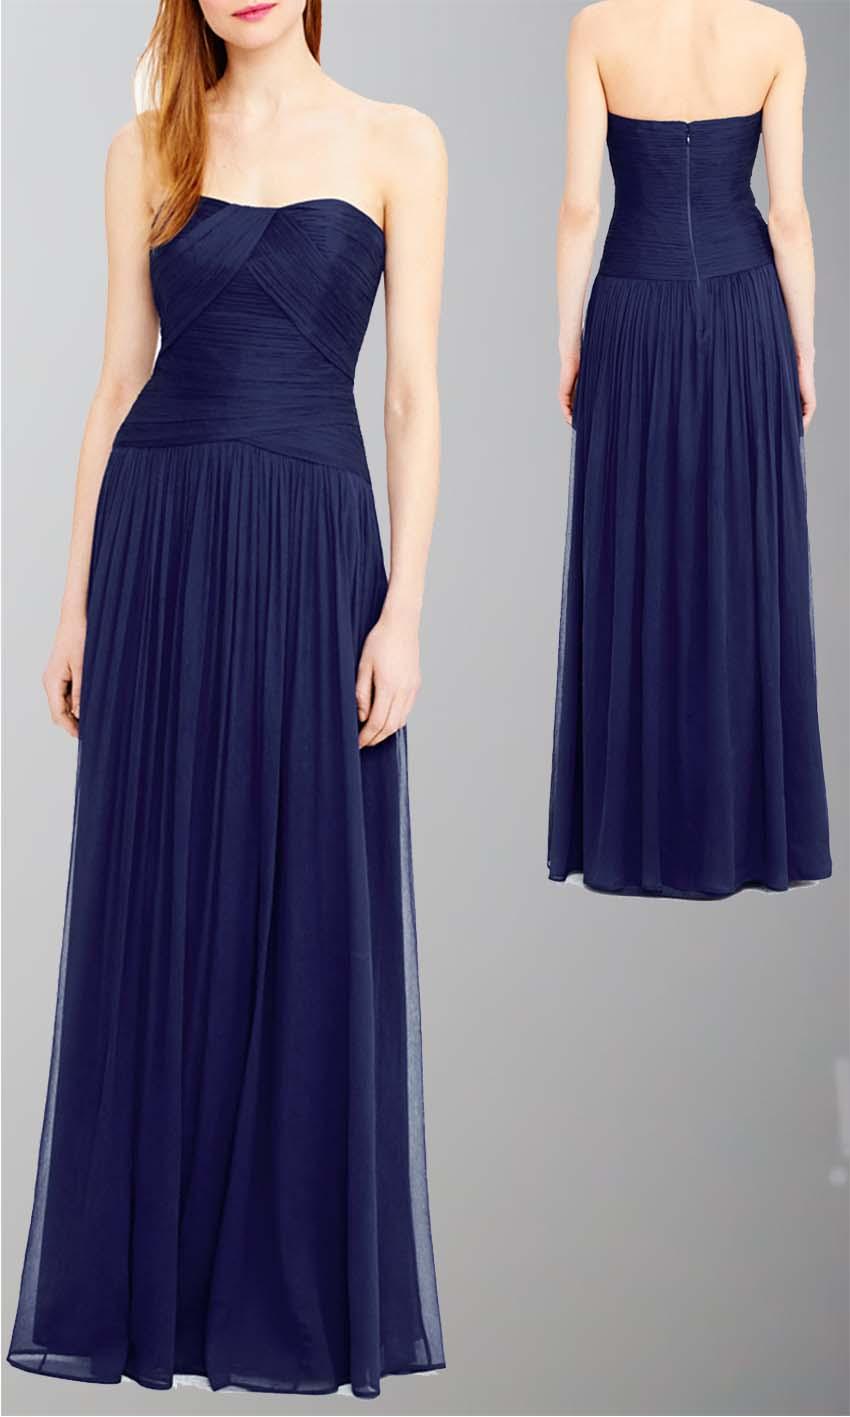 Mariage - Navy Draped Flattering Long Bridesmaid Dress UK KSP337 [KSP337] - £92.00 : Cheap Prom Dresses Uk, Bridesmaid Dresses, 2014 Prom & Evening Dresses, Look for cheap elegant prom dresses 2014, cocktail gowns, or dresses for special occasions? kissprom.co.uk o